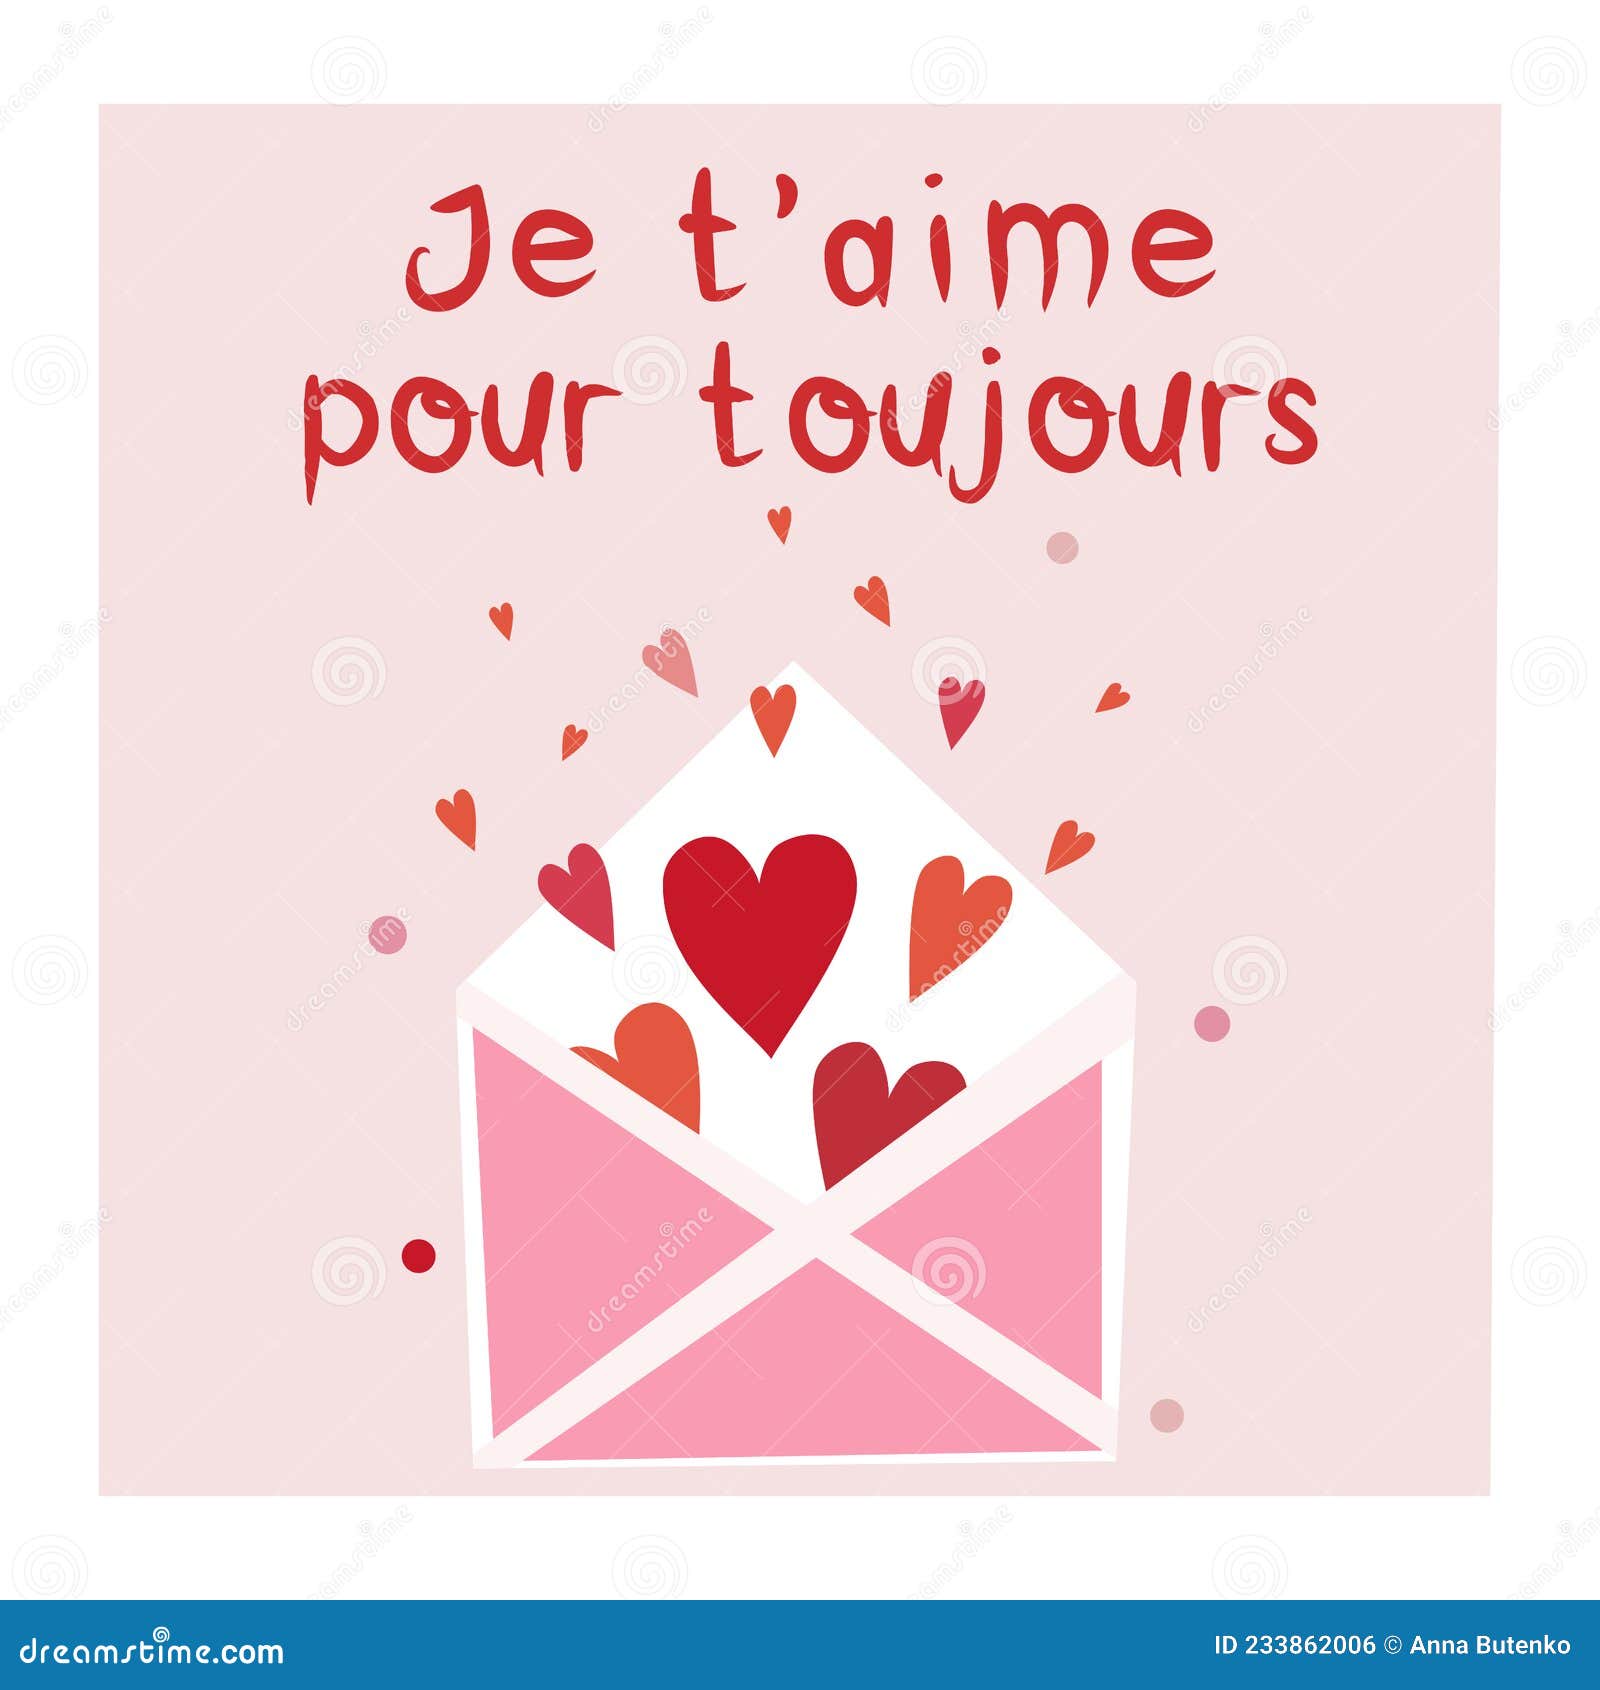 happy valentine   with french lettering.   for web, print, stickers, template, etc.